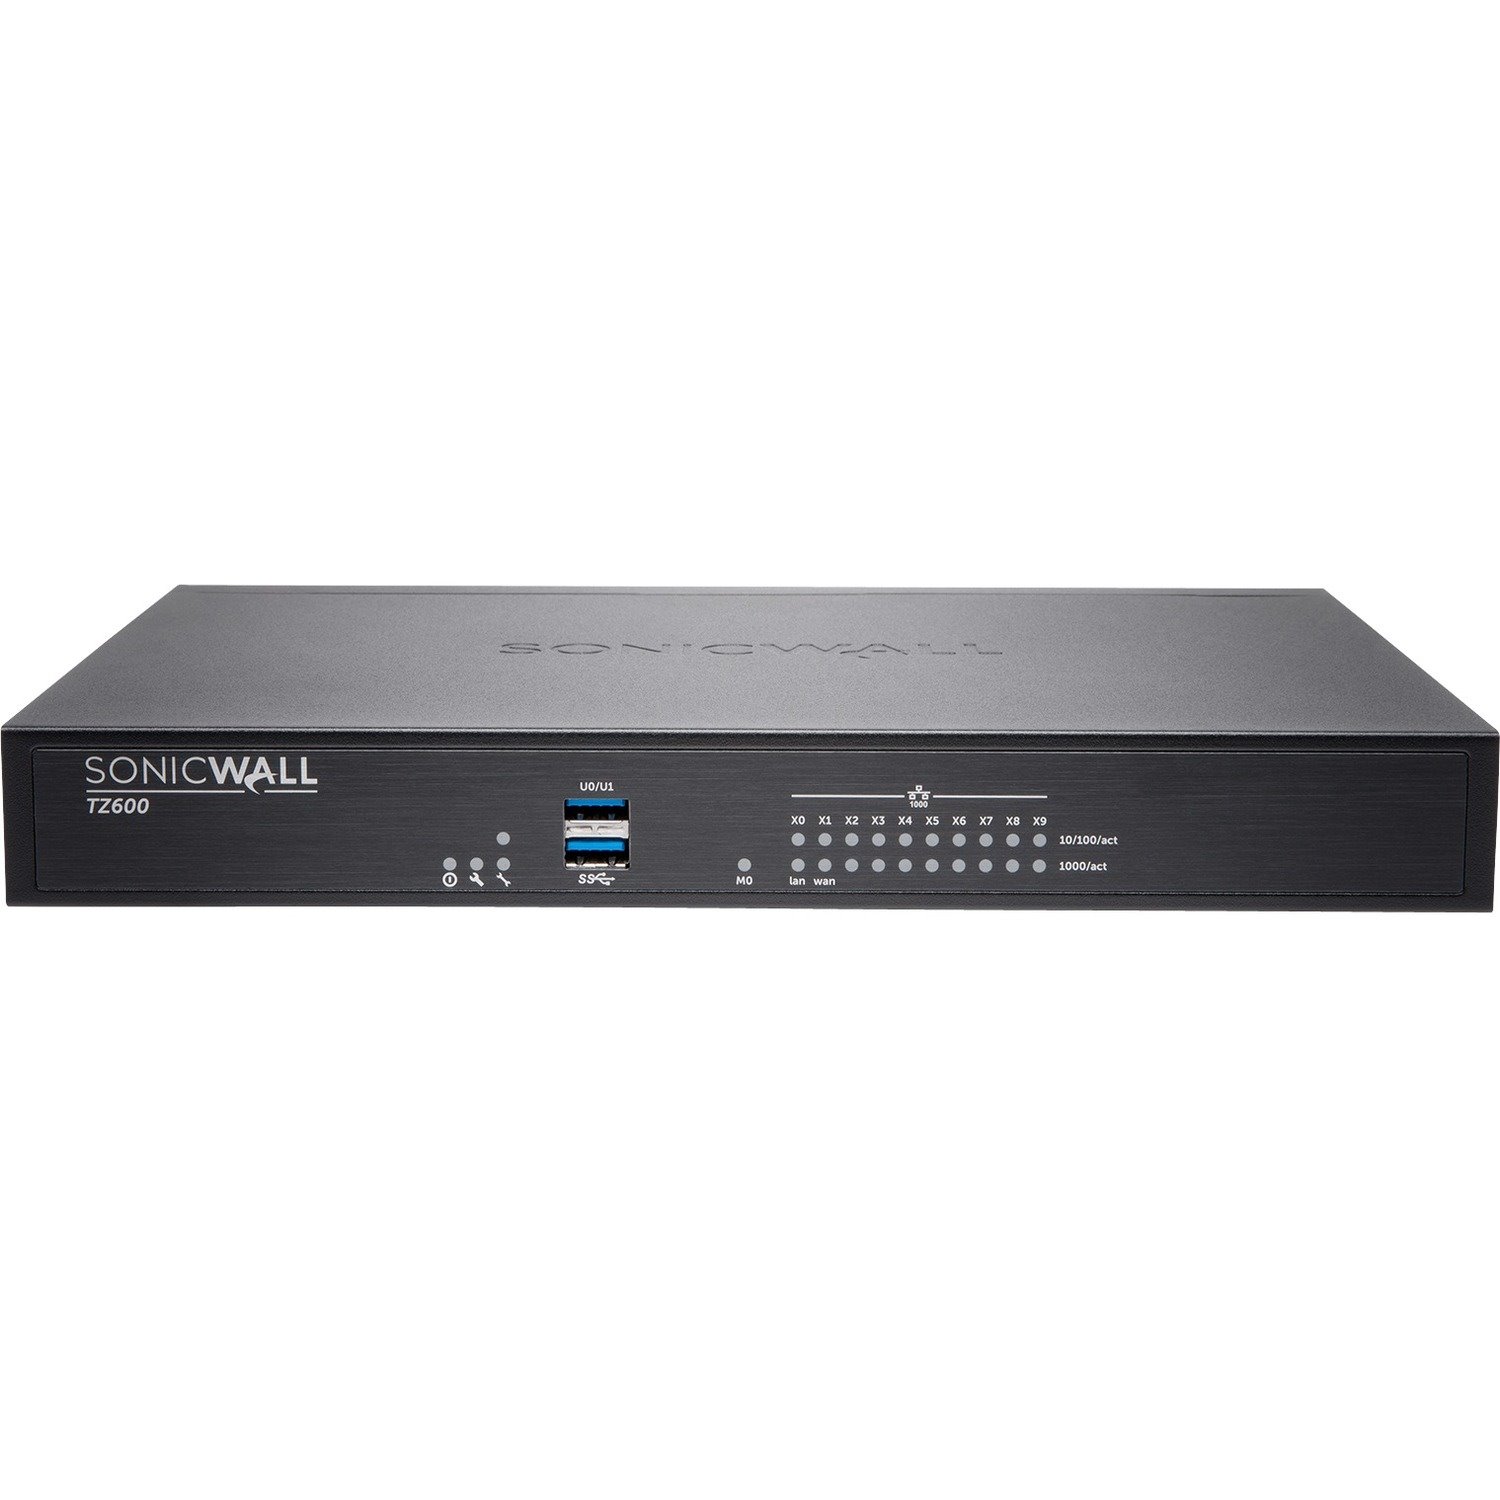 SonicWALL TZ600 Network Security/Firewall Appliance - Services License Required